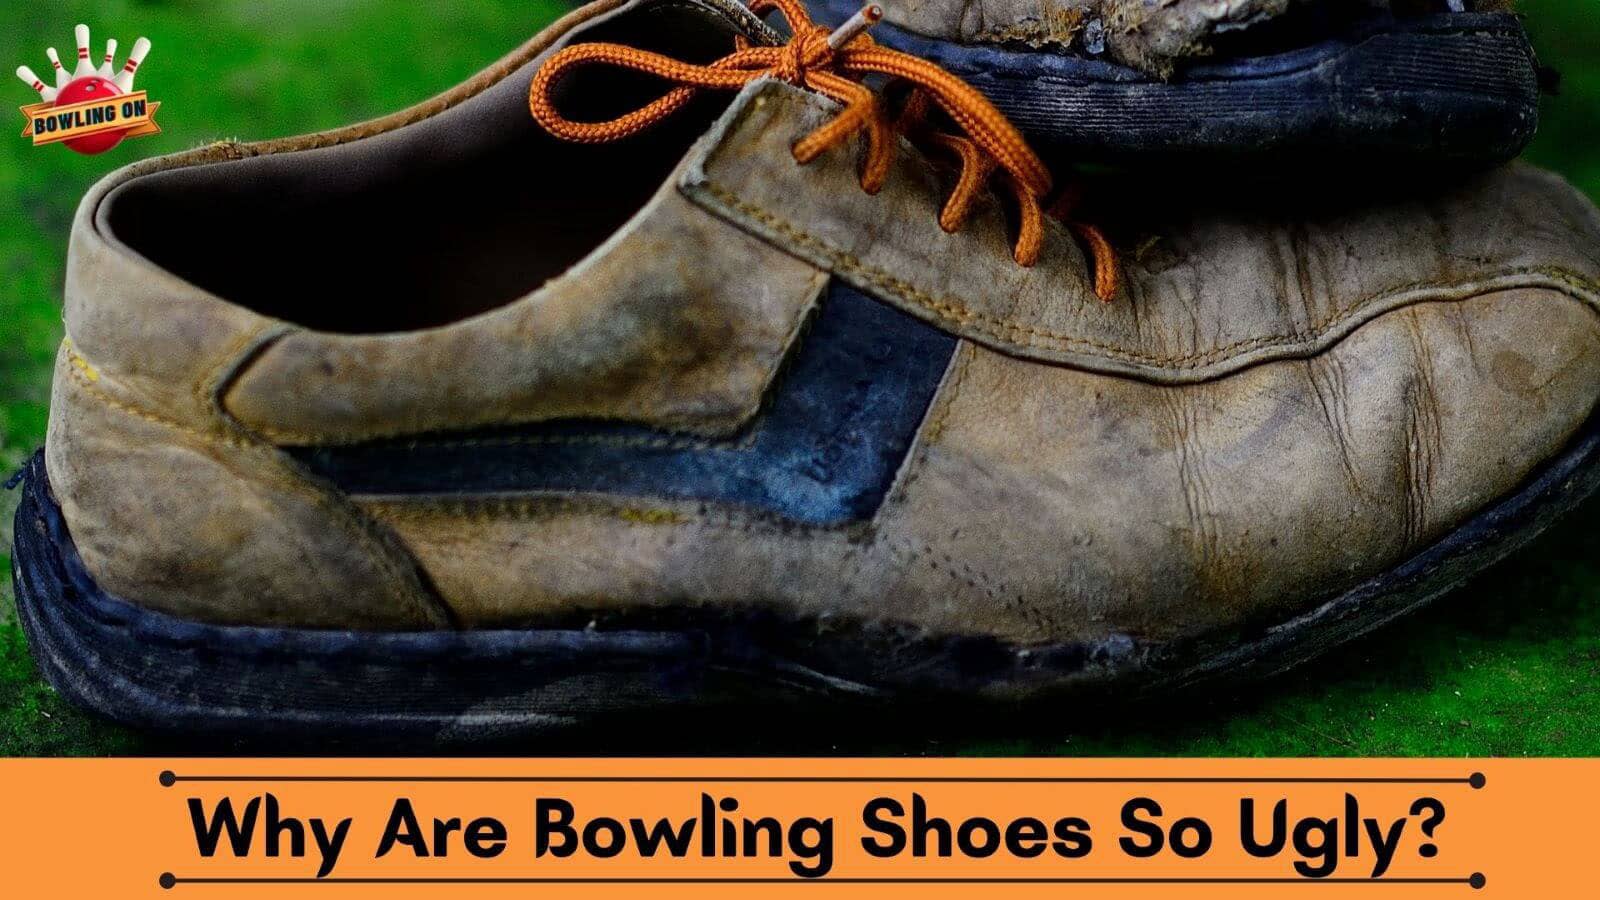 Why Are Bowling Shoes So Ugly?